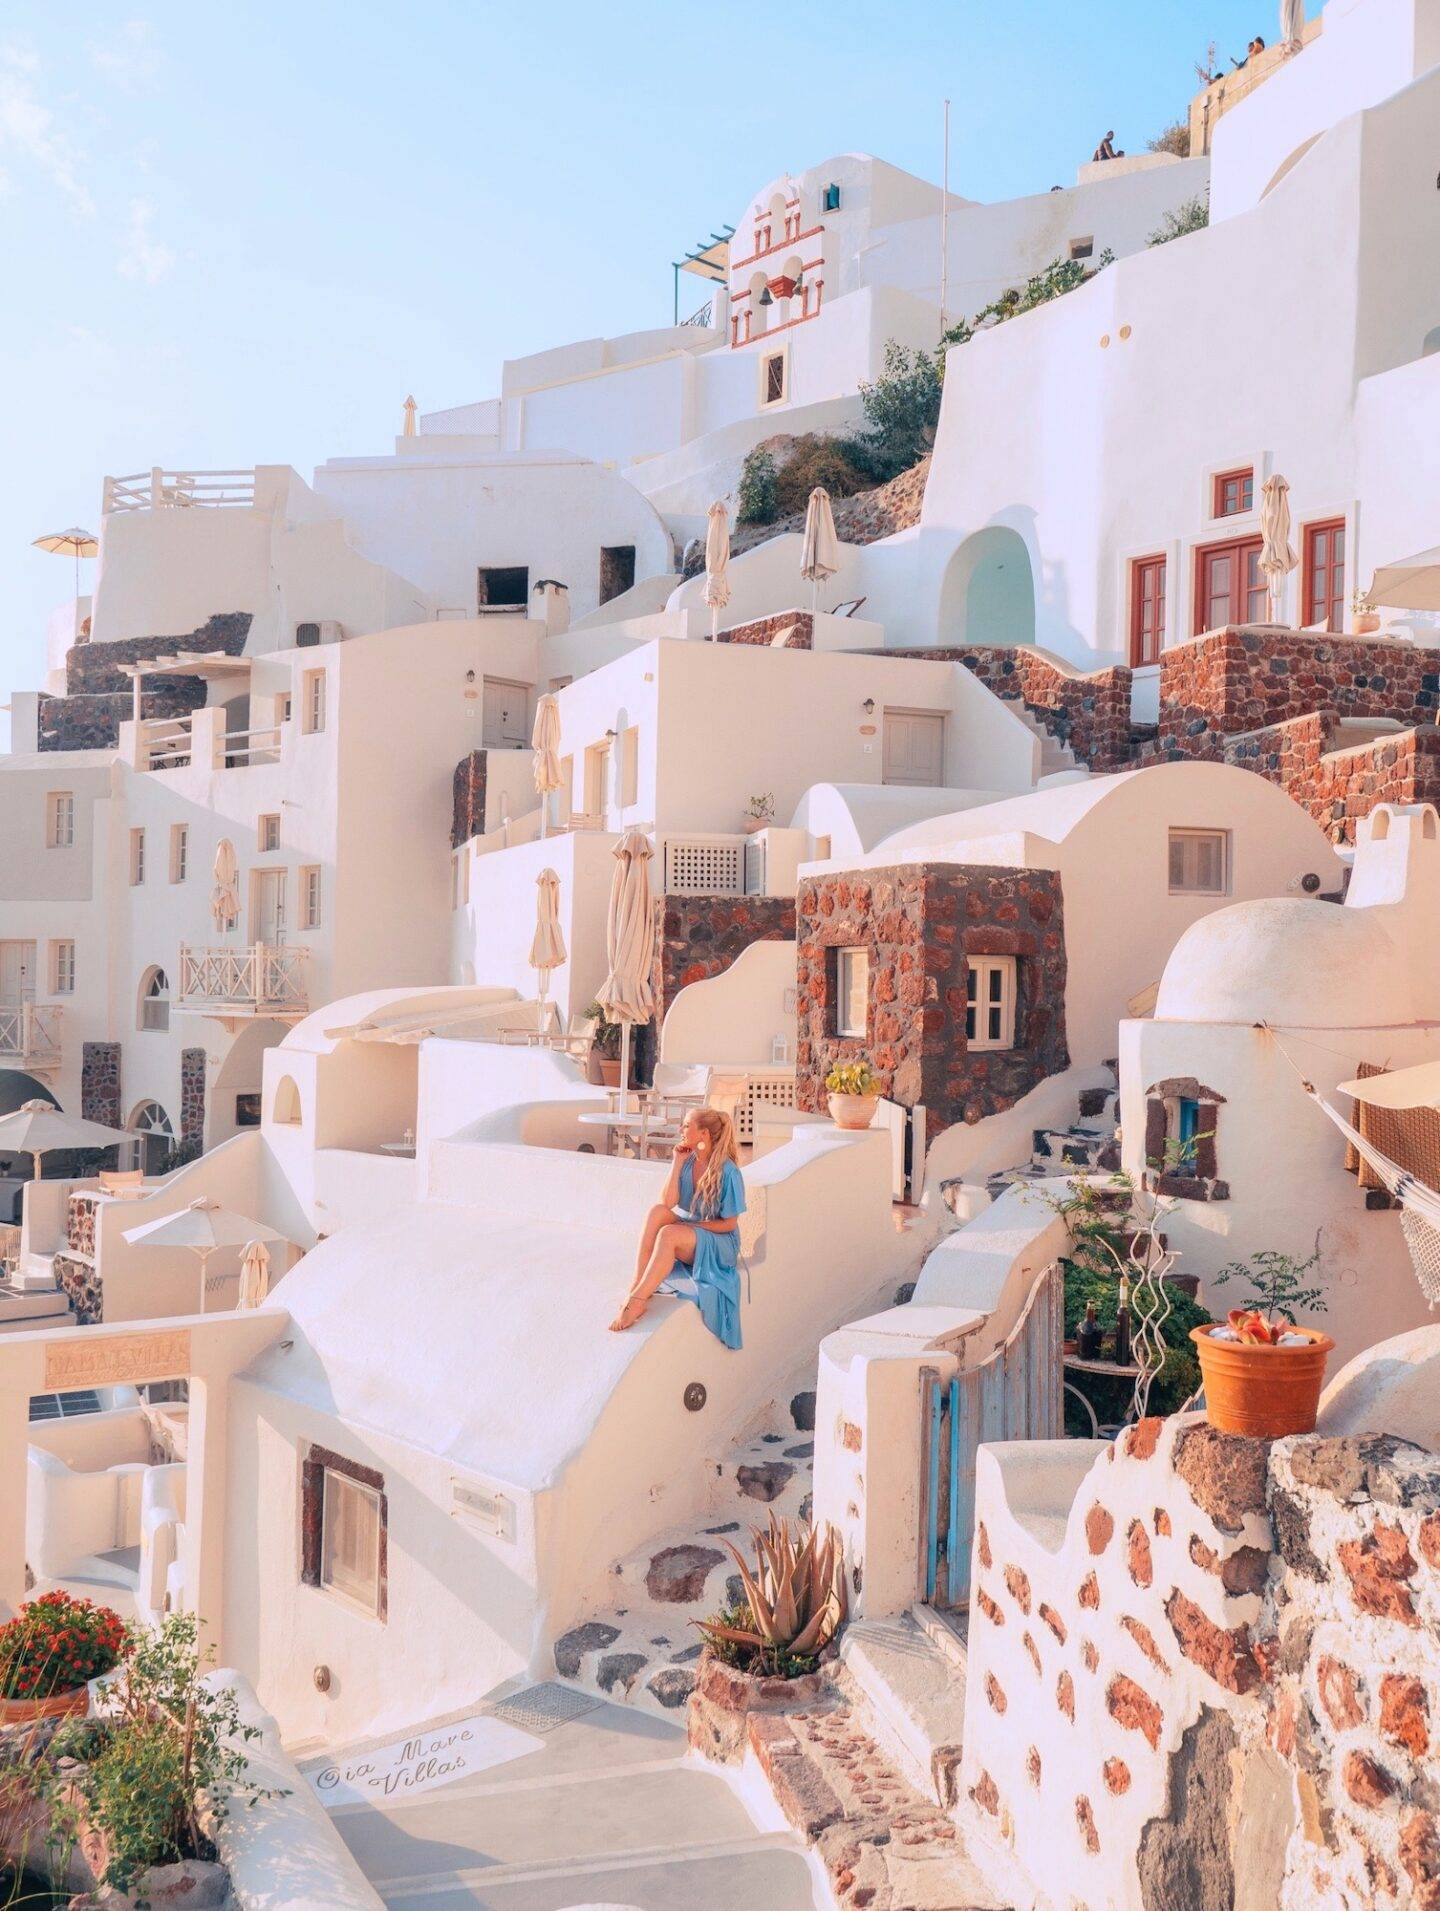 The best photo spots and most instagrammable places in Santorini: Oia Cliffside. Click the photo to see the rest of my list of the best instagram photo spots in Santorini!